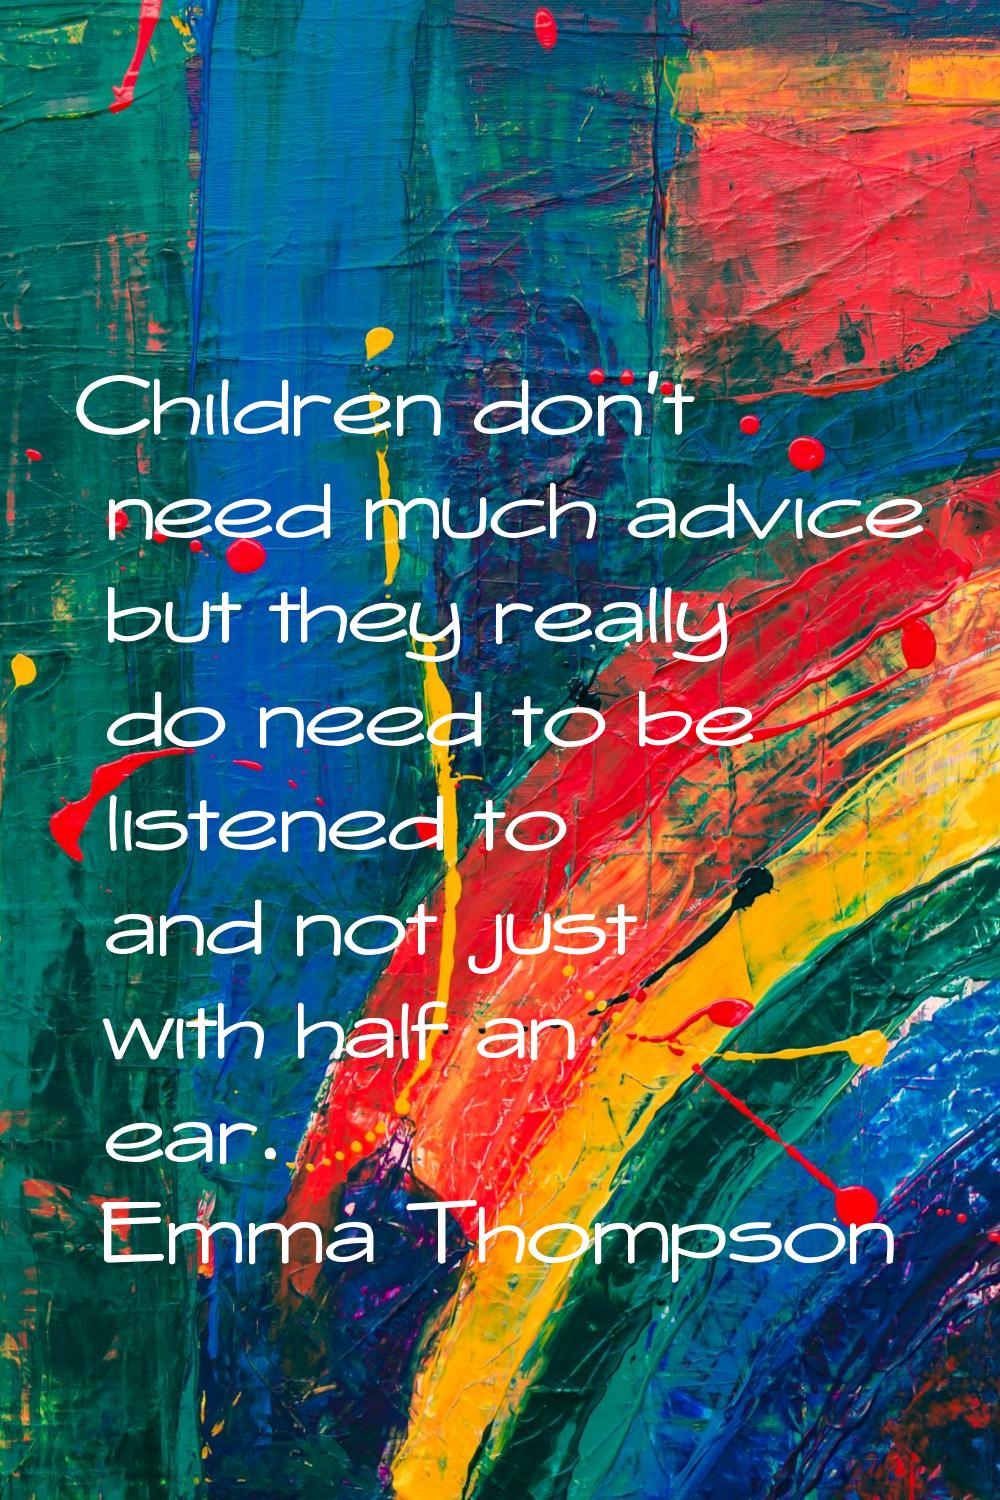 Children don't need much advice but they really do need to be listened to and not just with half an